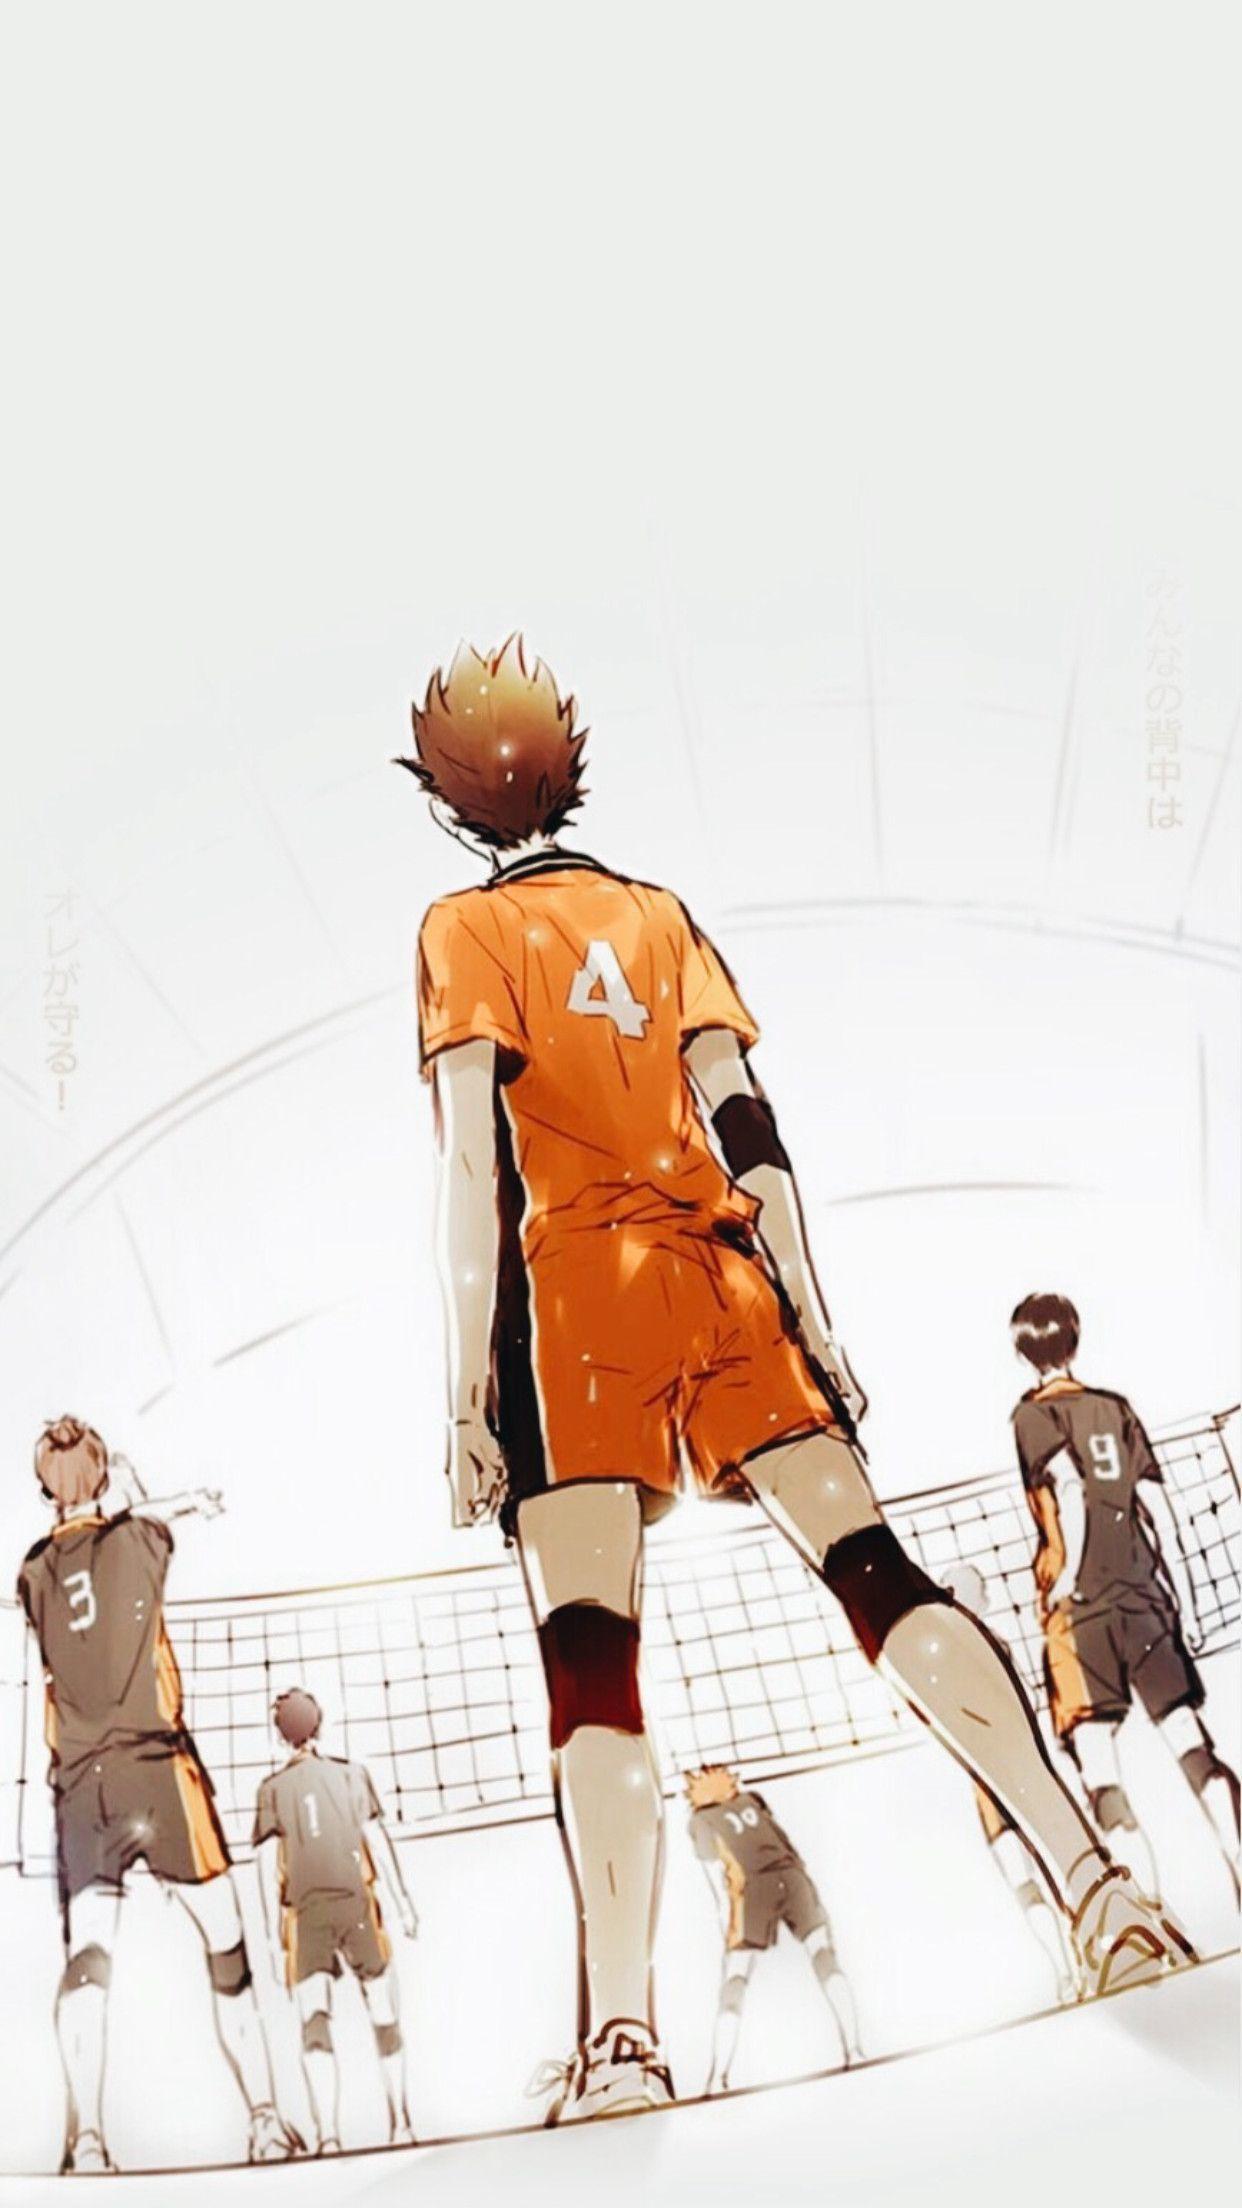 Volleyball Anime Wallpapers - Top Free Volleyball Anime Backgrounds